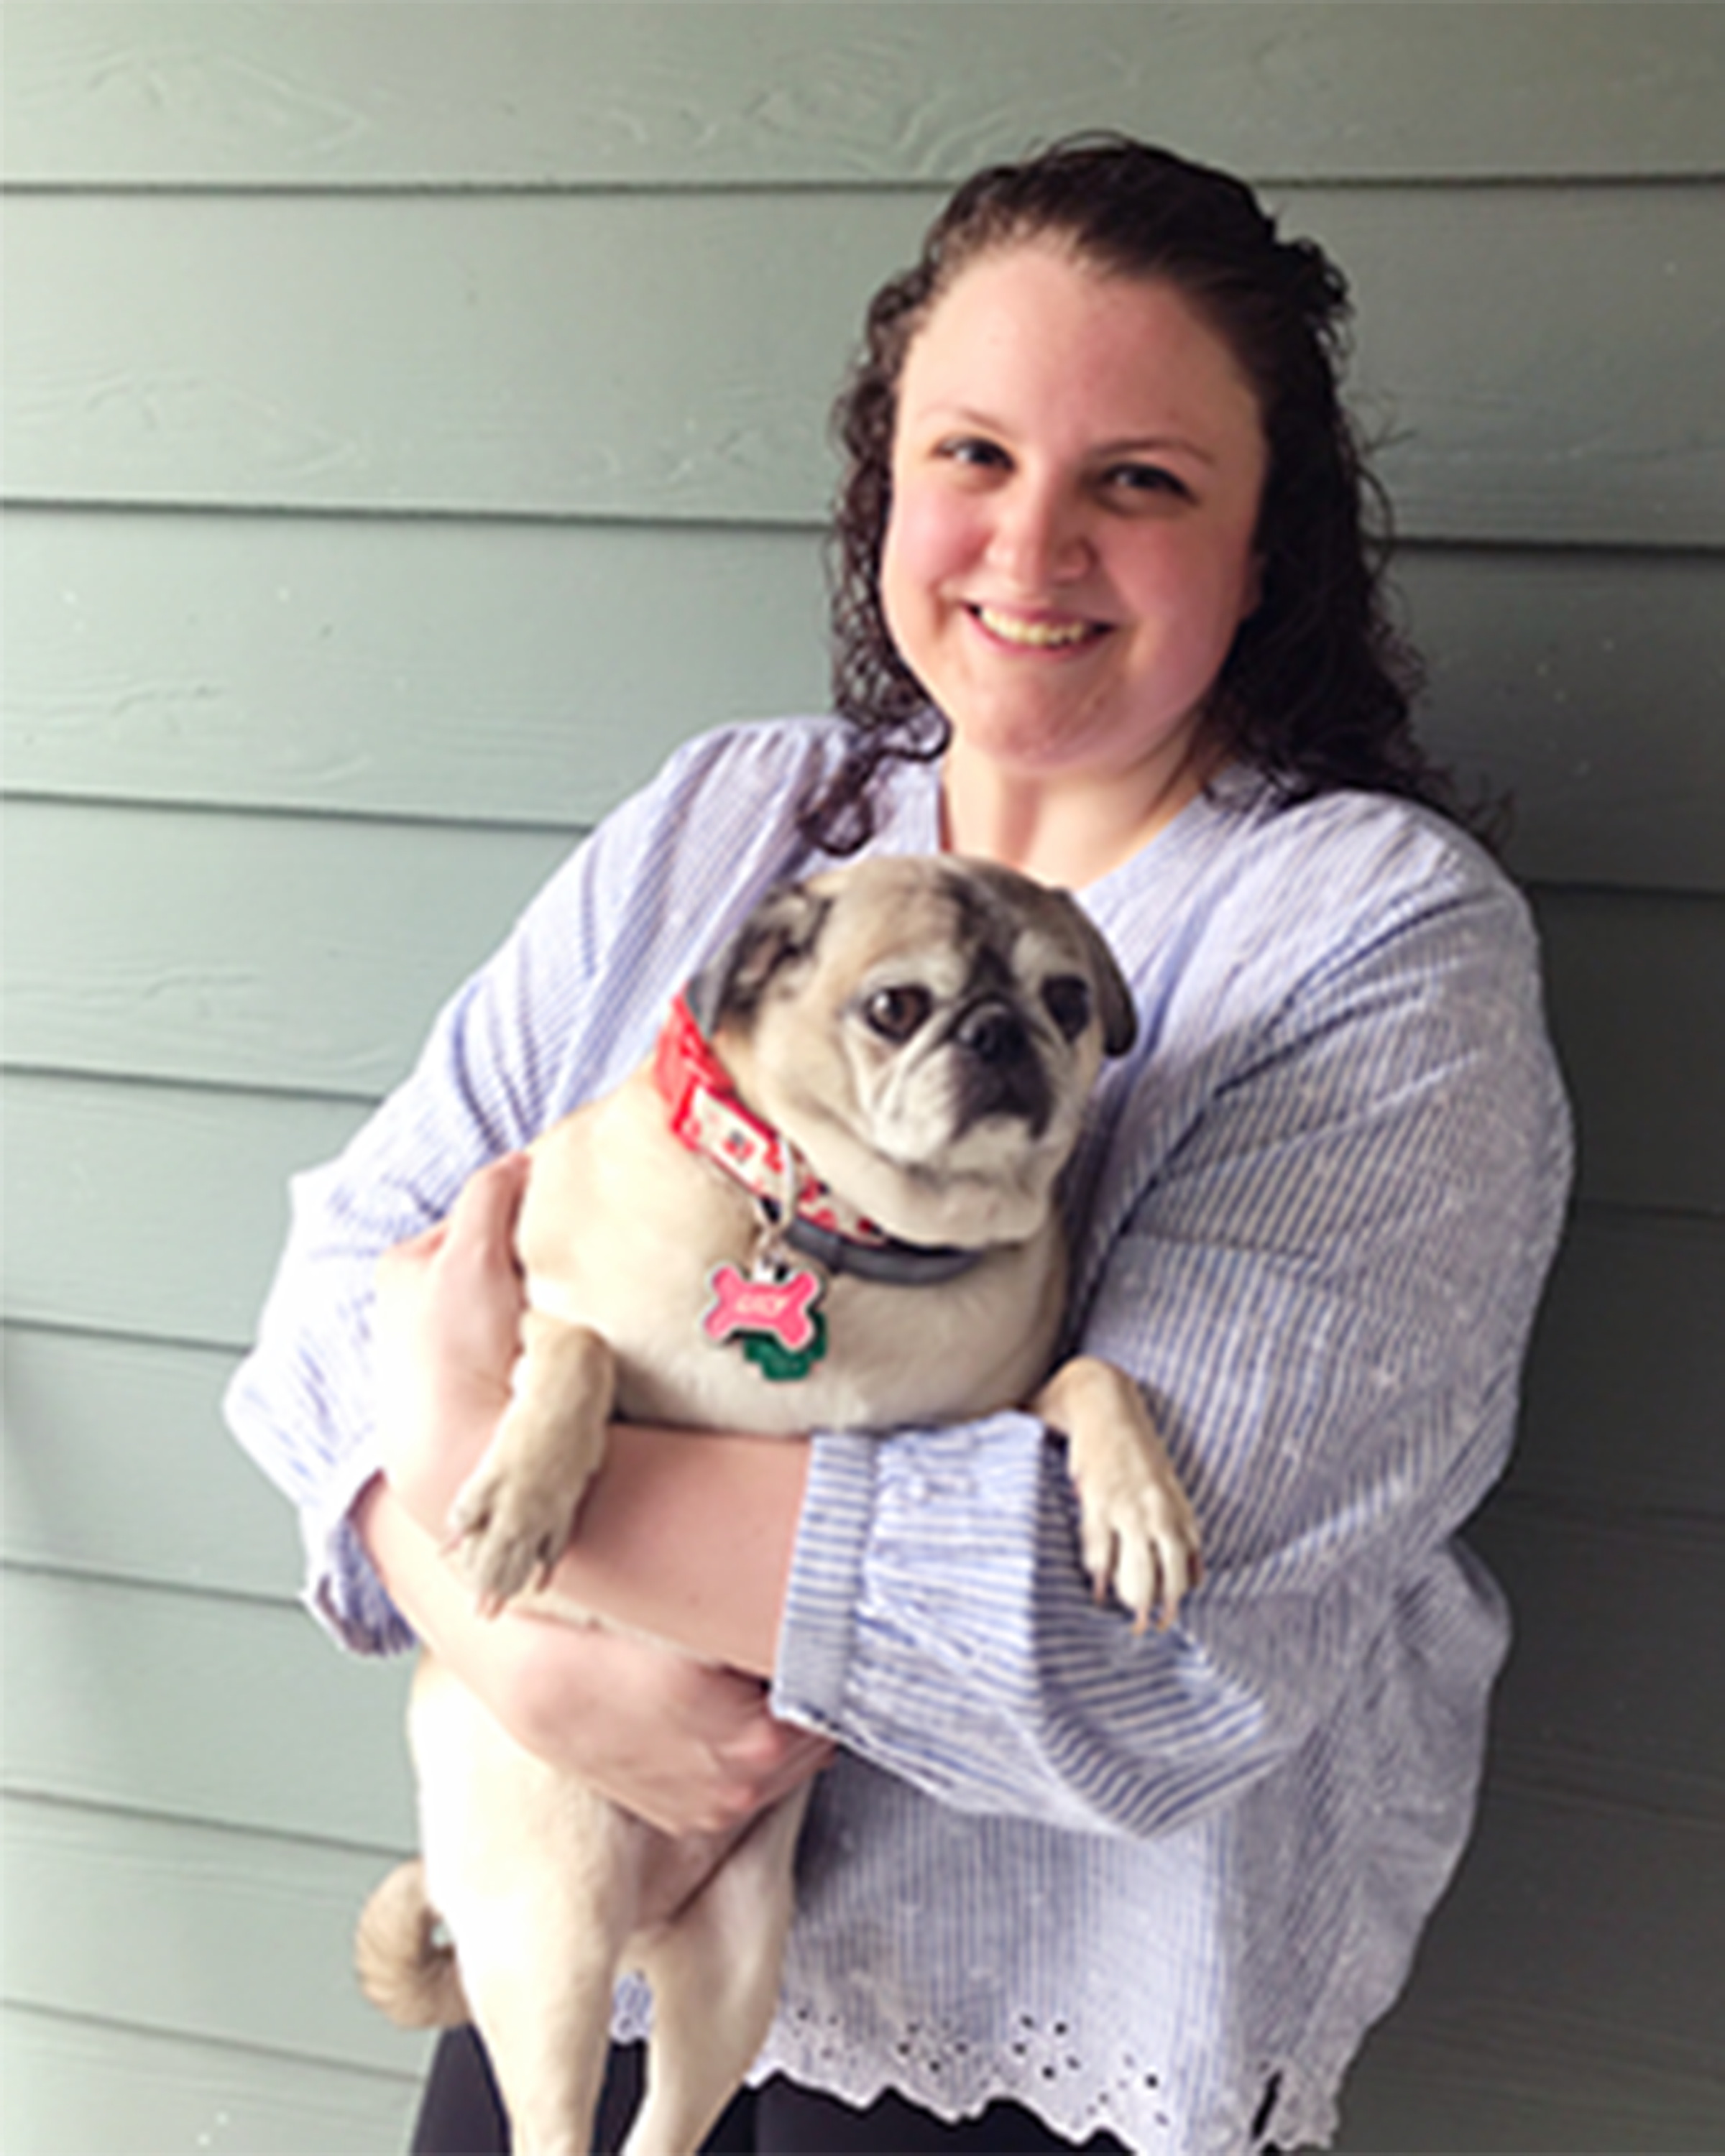 University of Illinois veterinary student Katie Havighorst, with her dog Lily, had planned to attend a national symposium before the pandemic forced its cancellation. (Provided photo)